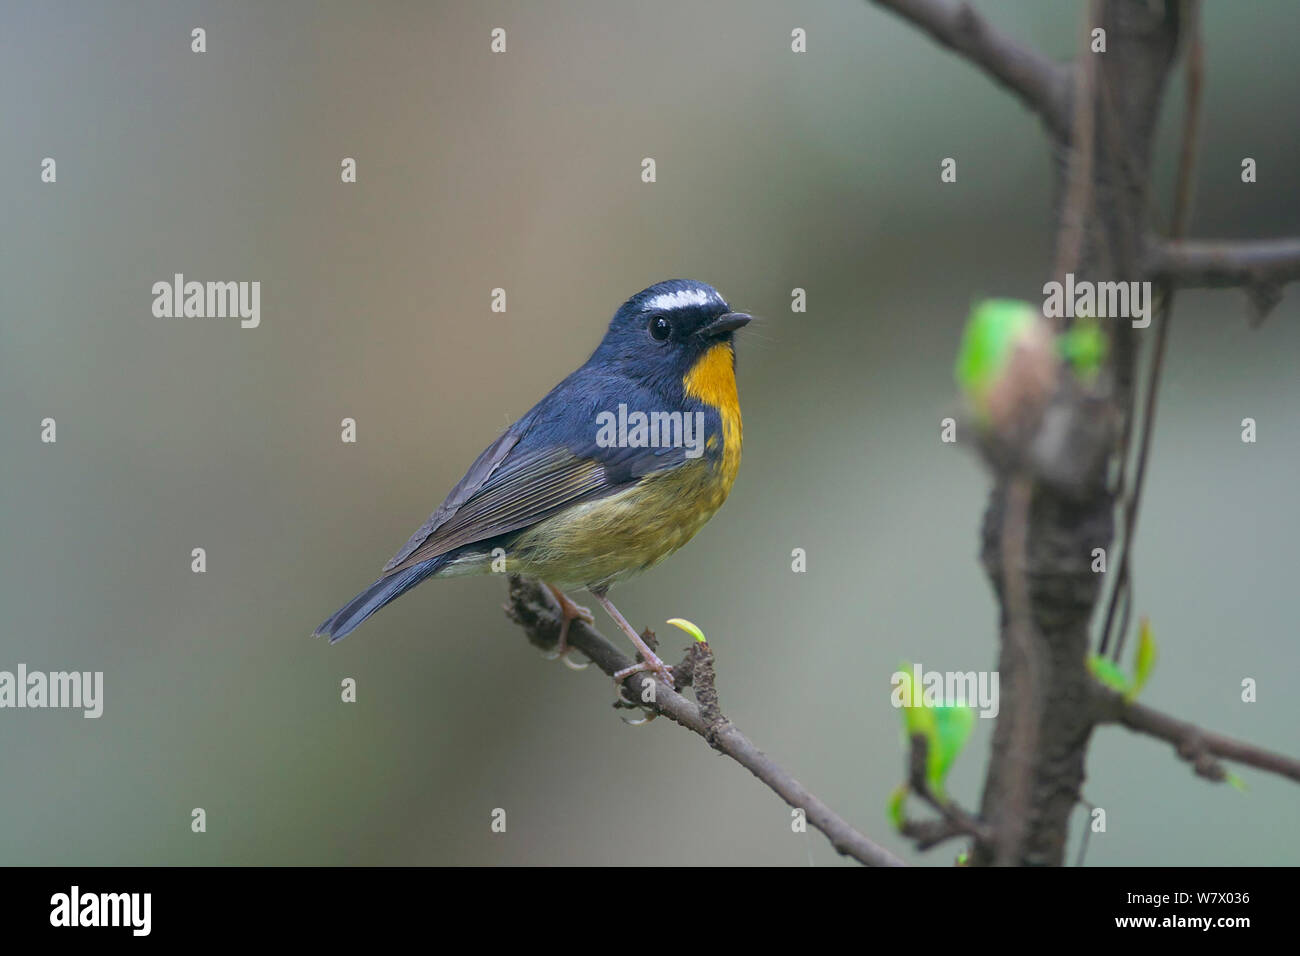 Snowy-browed Flycatcher (Ficedula hyperythra) perched Chengdu City, Sichuan Province, China, Asia Stock Photo